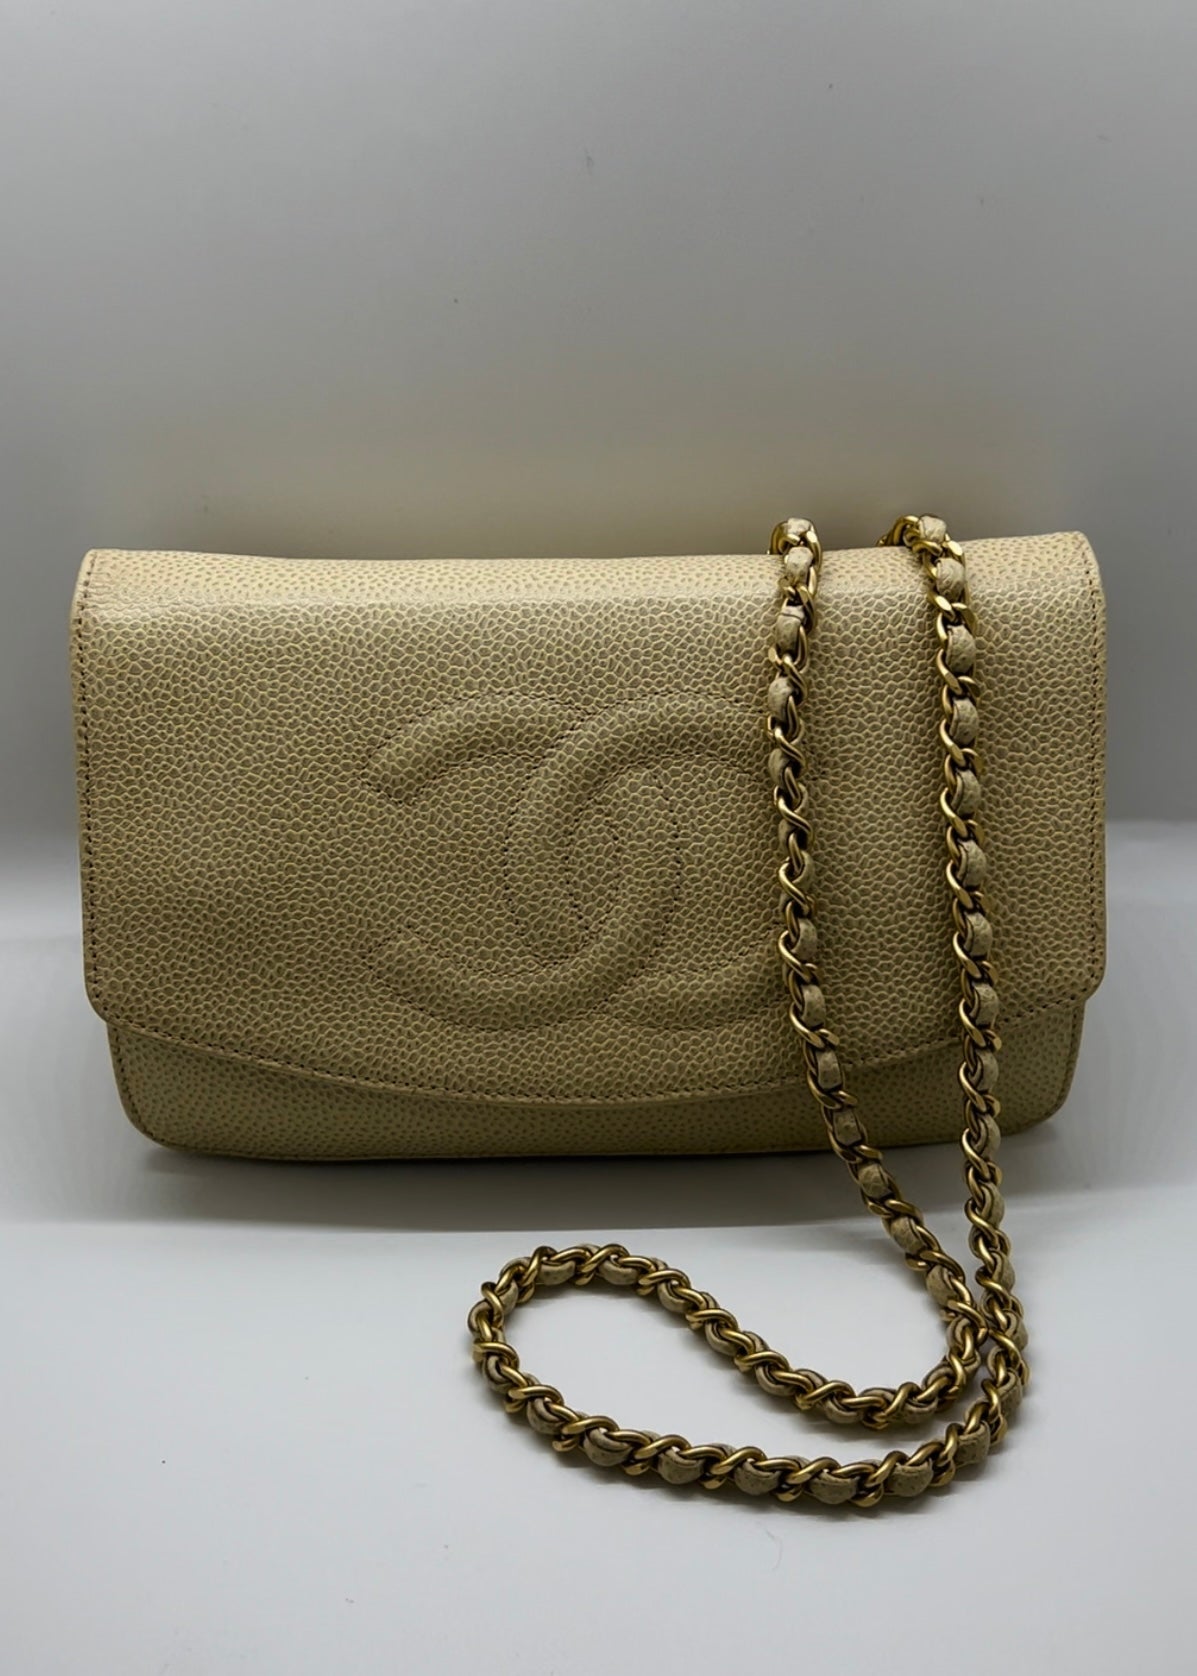 Chanel Timeless Vintage Wallet On A Chain – My Best Friend's